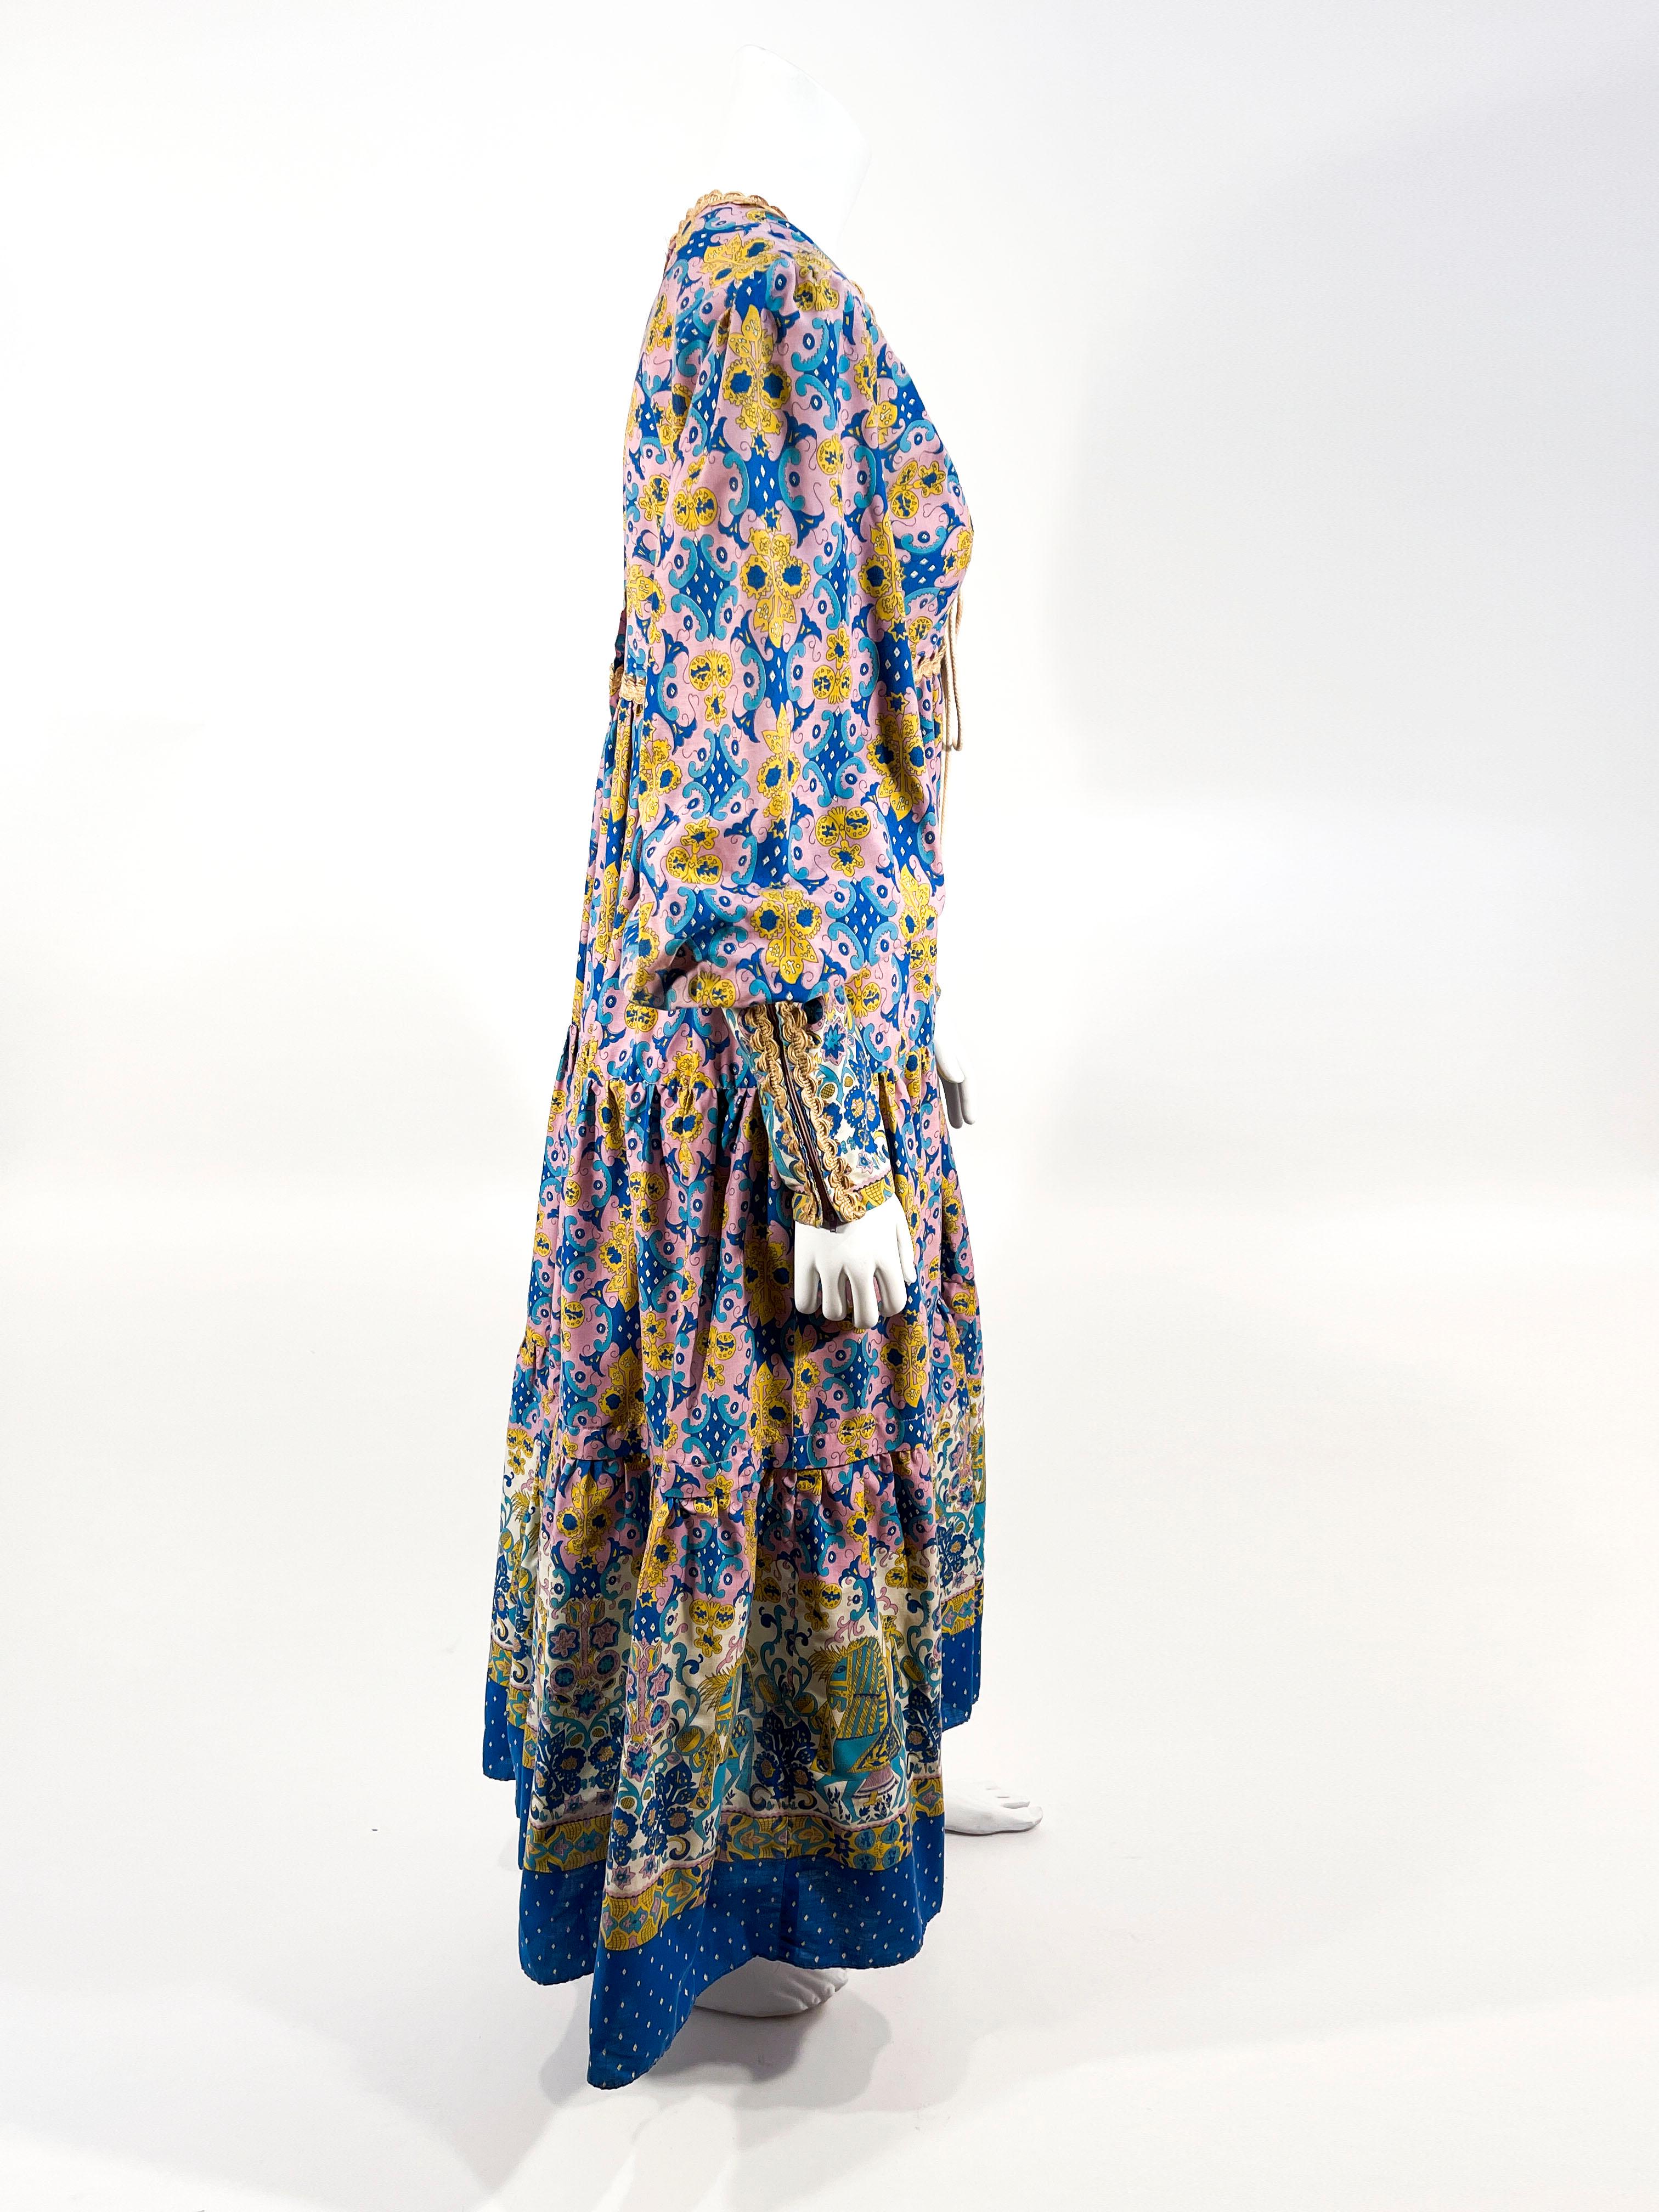 1969 Gunne Sax Eclectic Horseman Printed Cotton Dress In Good Condition For Sale In San Francisco, CA